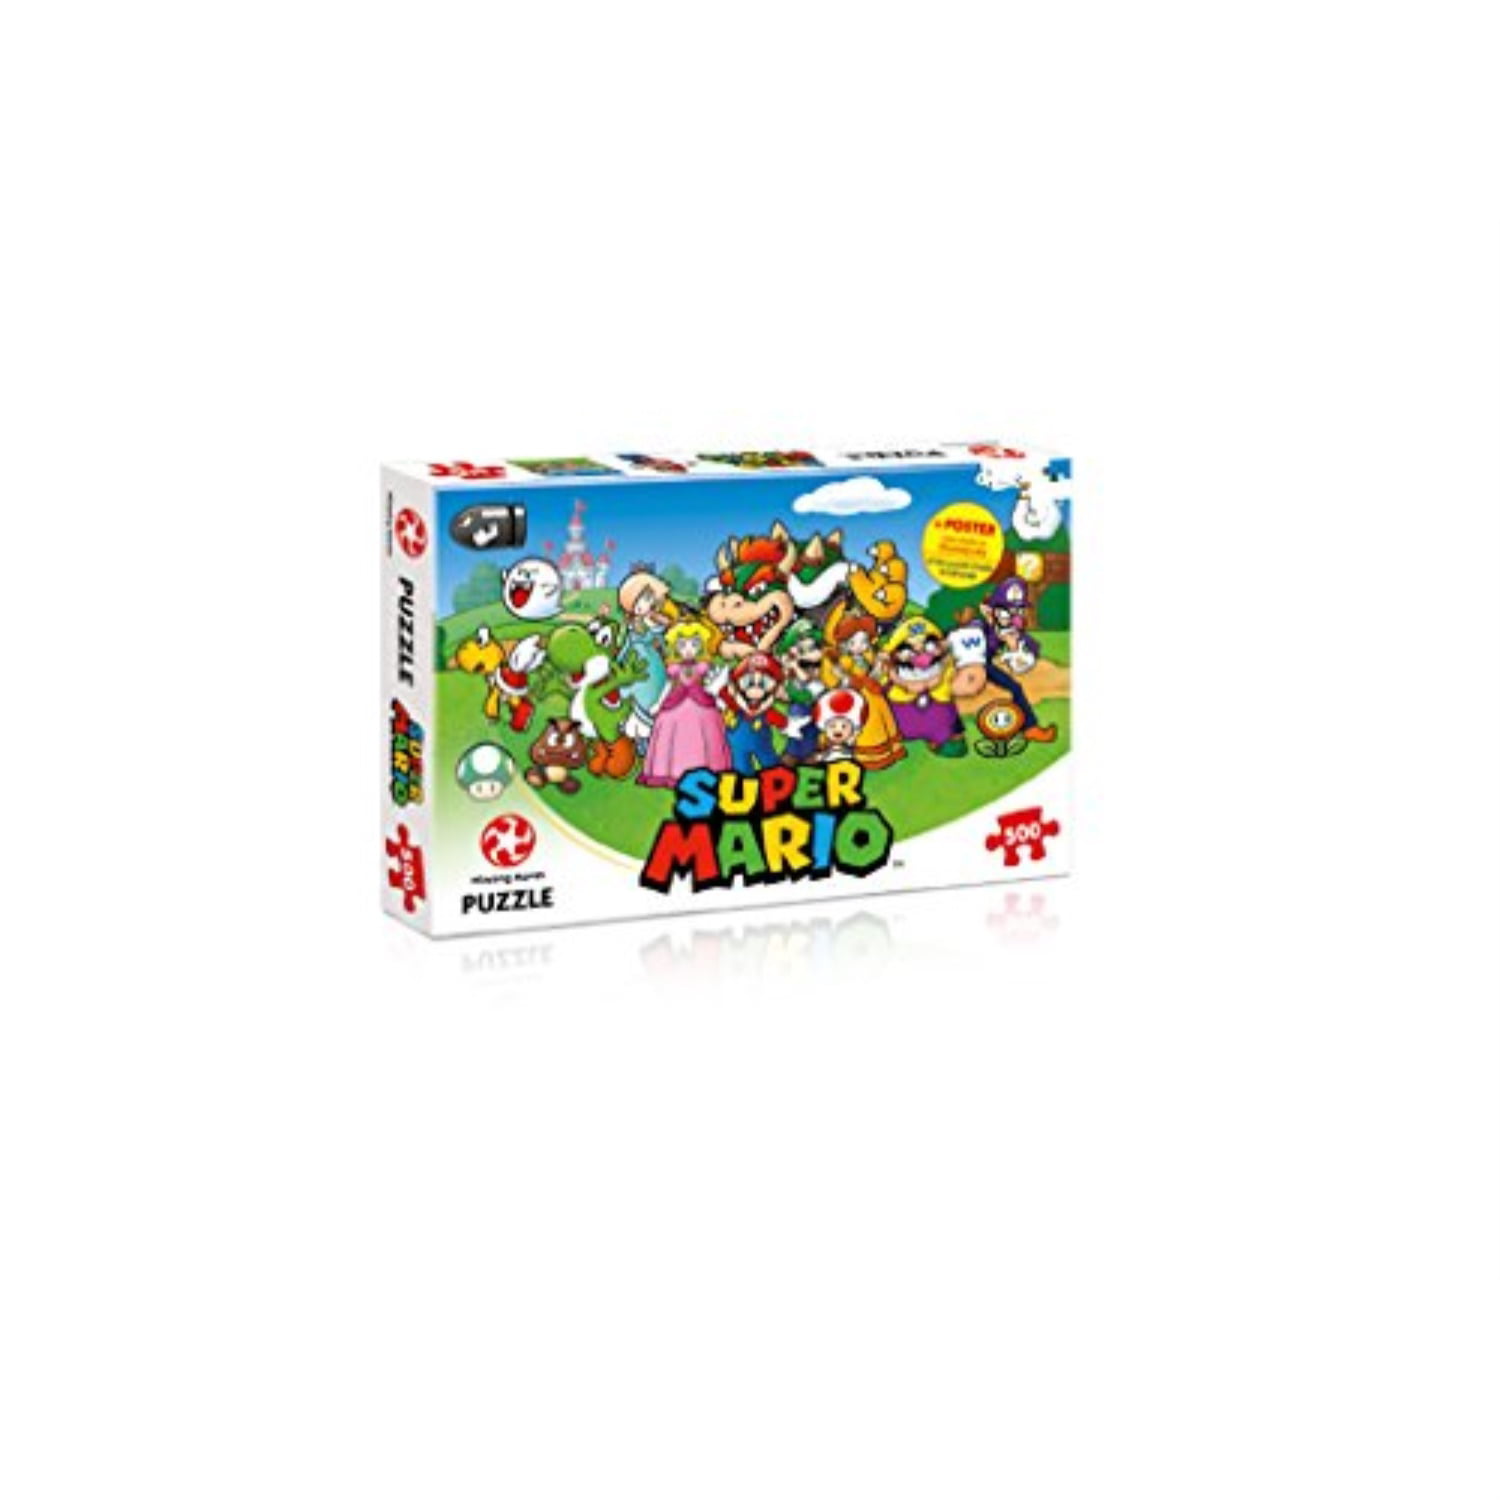 Super Mario and friends 500 piece jigsaw puzzle 